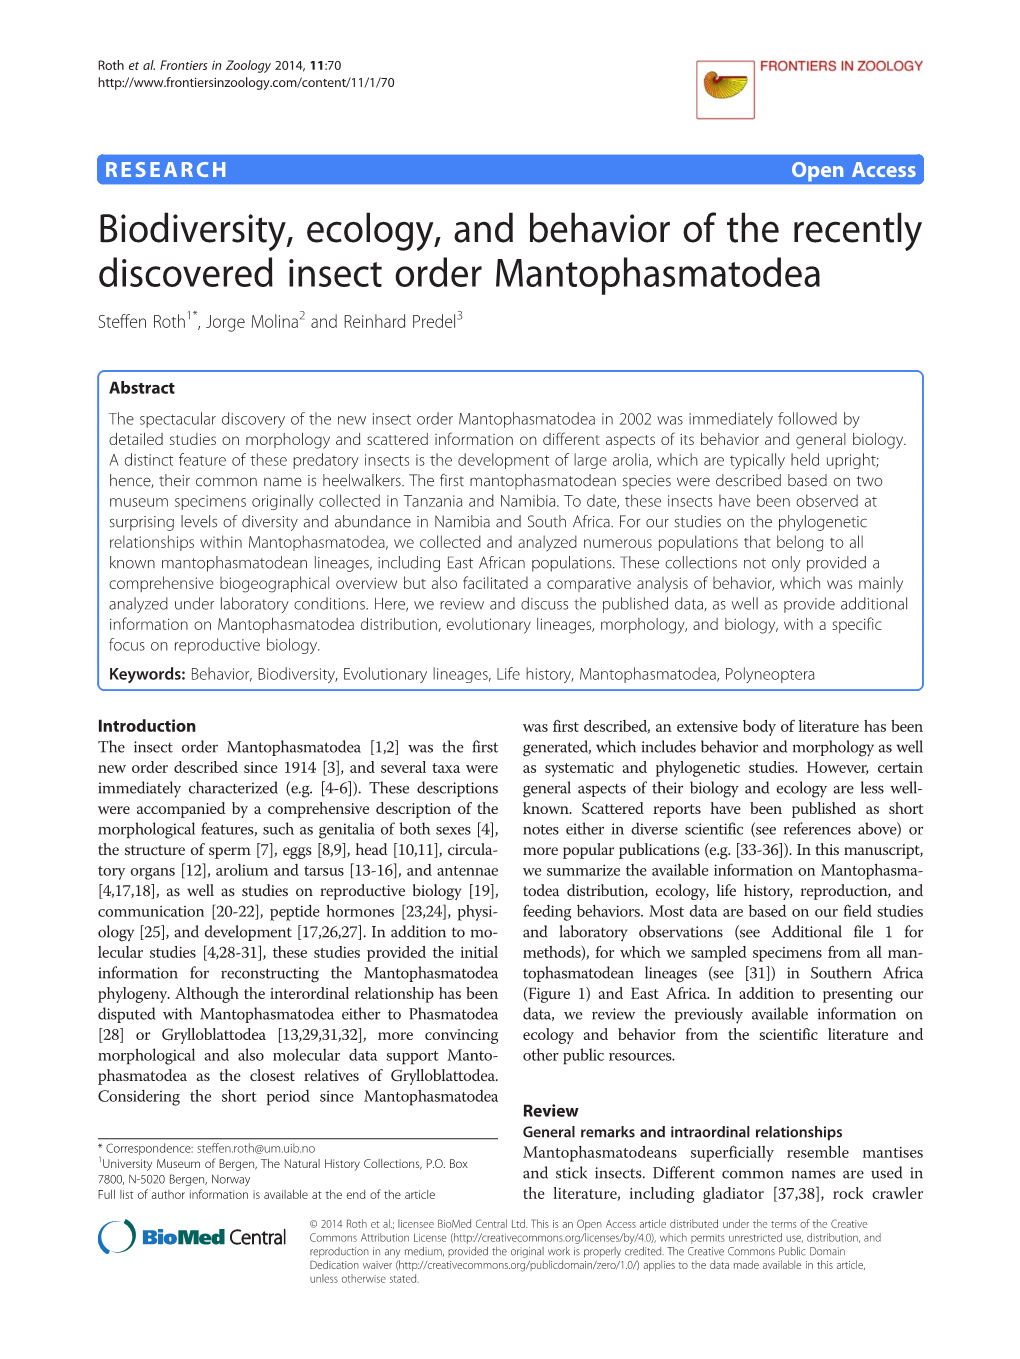 Biodiversity, Ecology, and Behavior of the Recently Discovered Insect Order Mantophasmatodea Steffen Roth1*, Jorge Molina2 and Reinhard Predel3